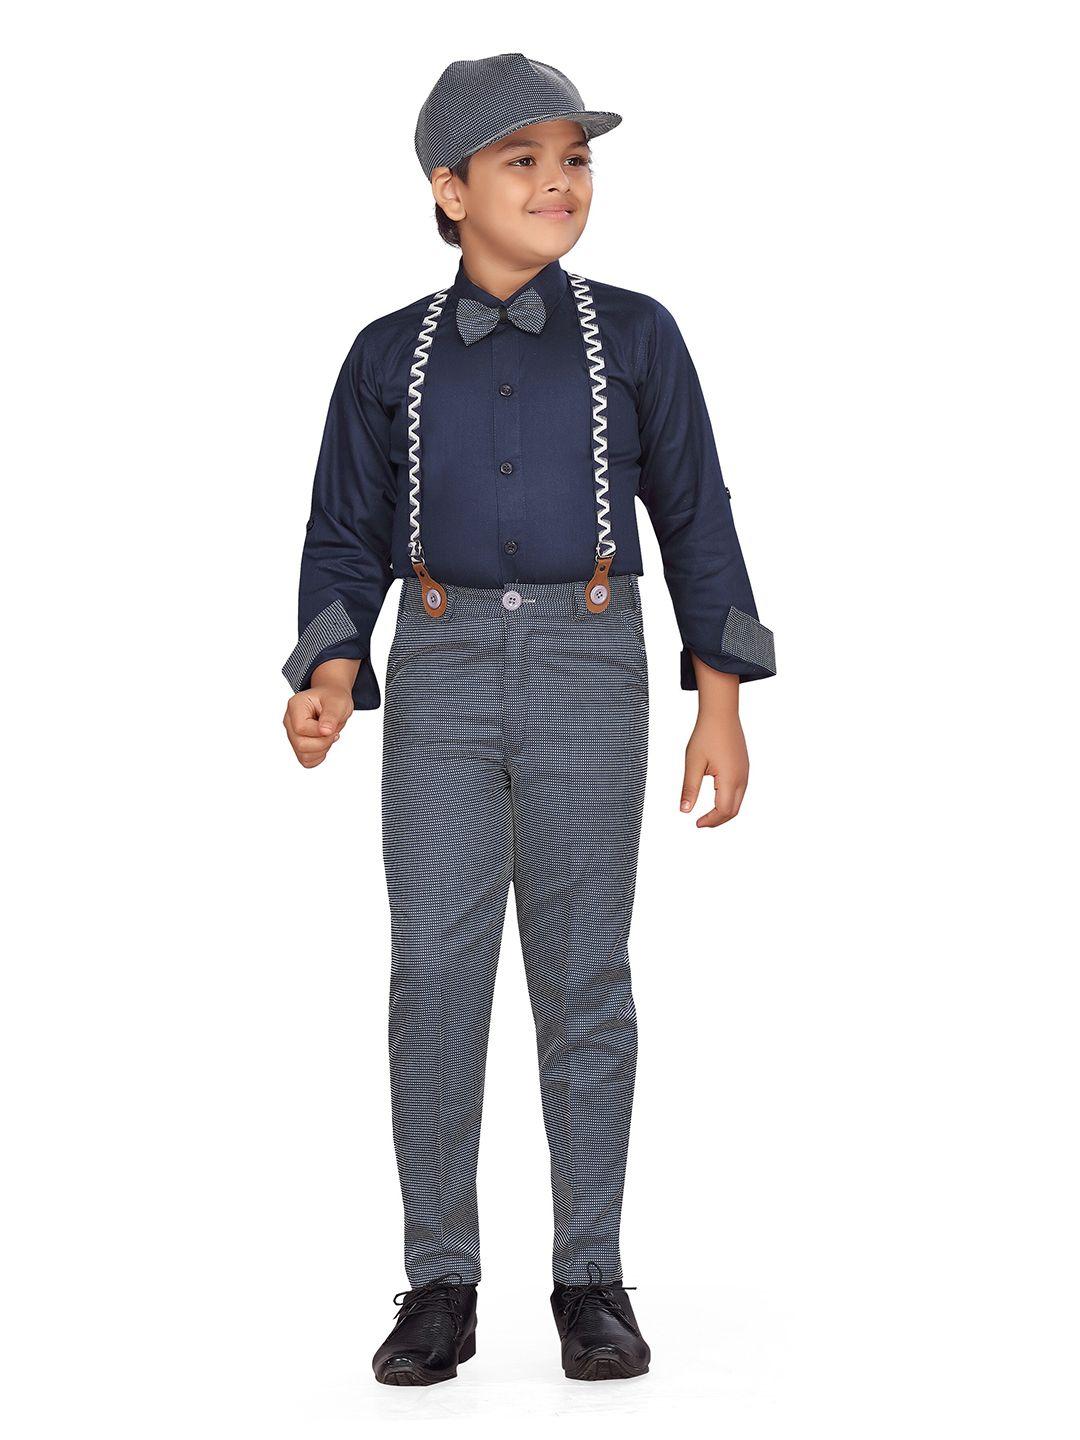 aj dezines boys navy blue & white solid shirt with trousers, cap, bow tie & suspender